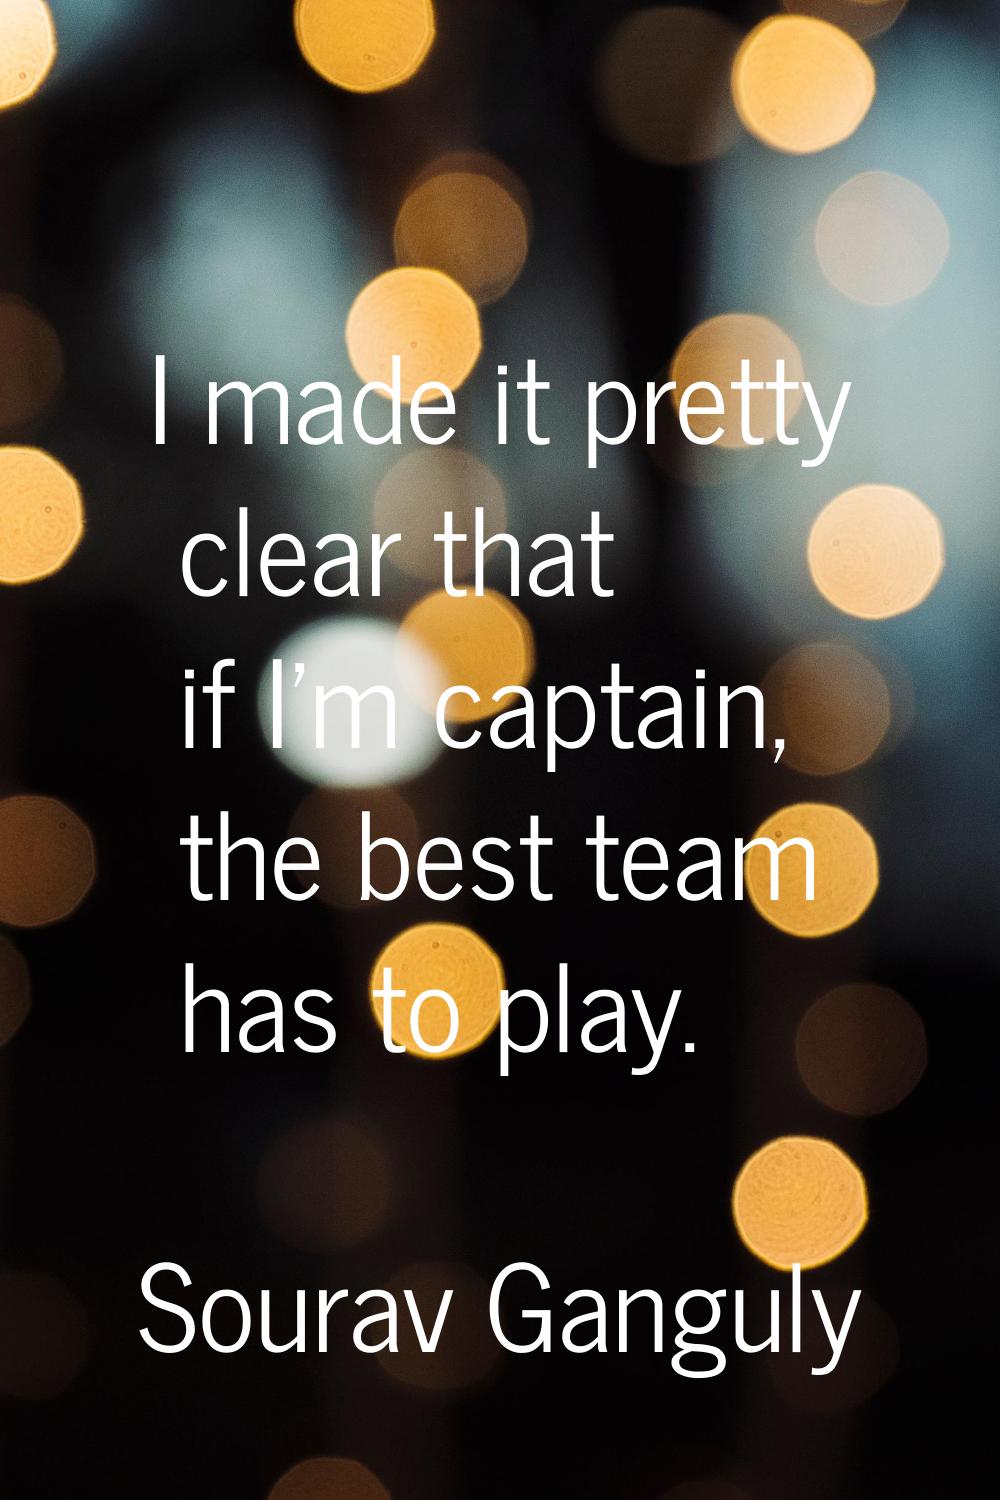 I made it pretty clear that if I'm captain, the best team has to play.